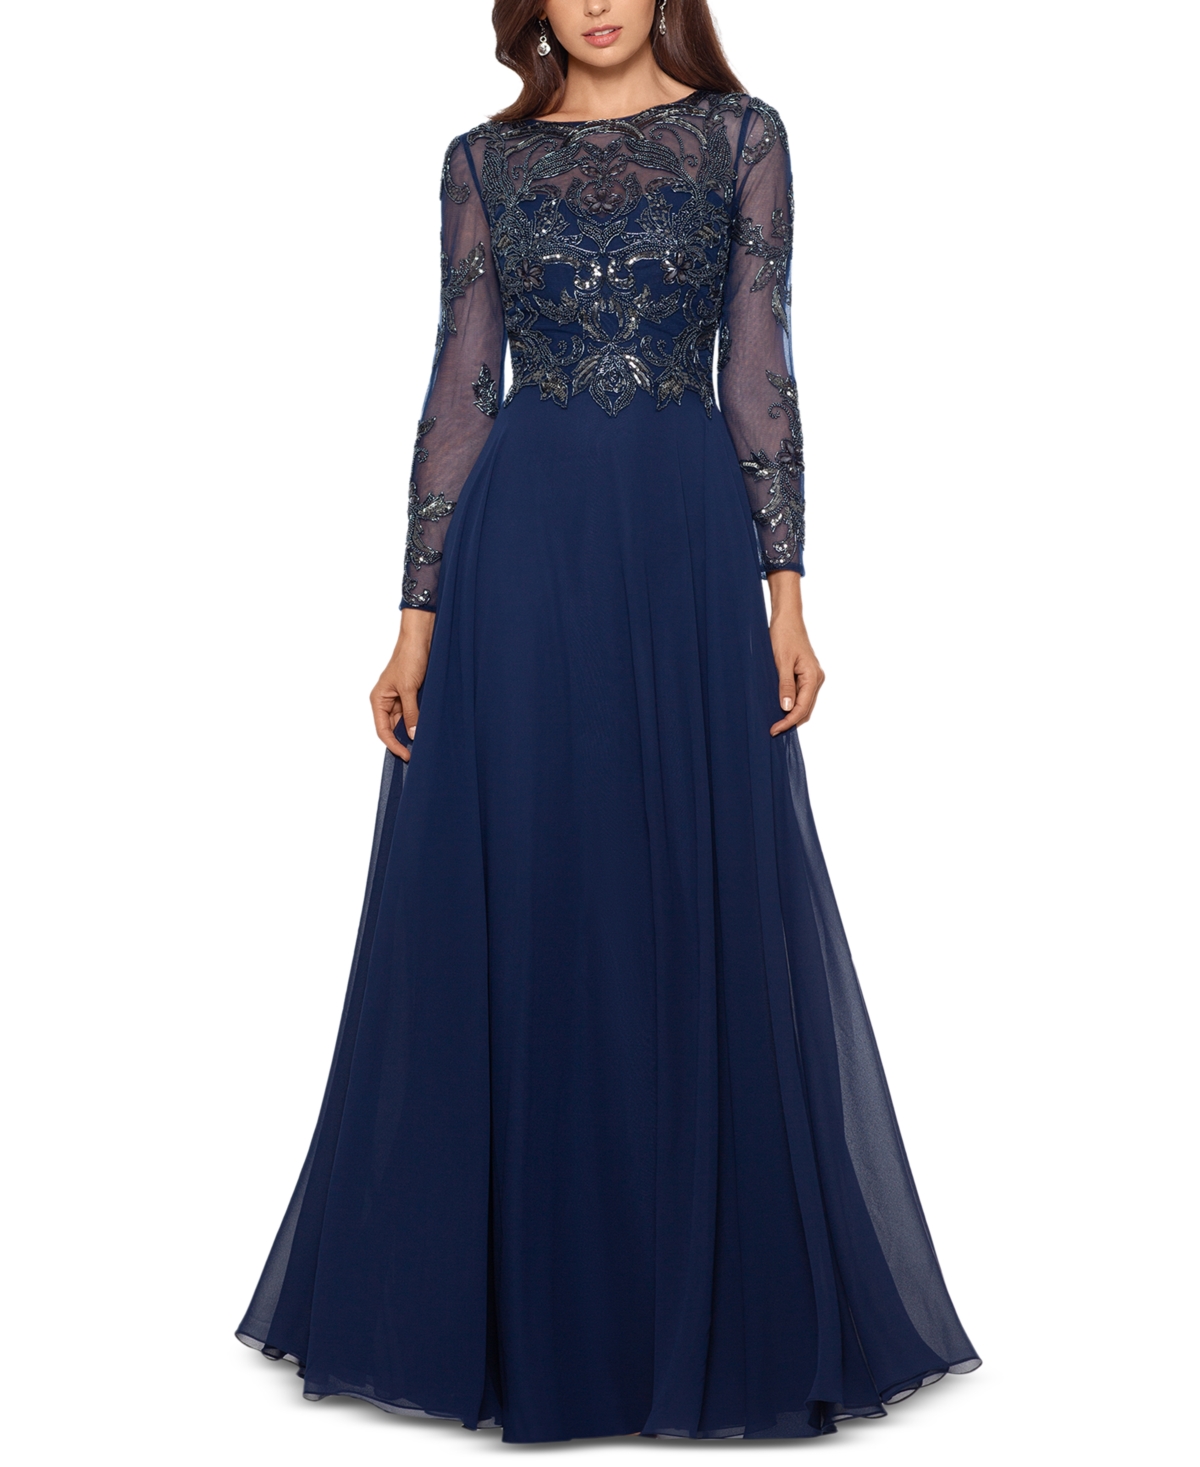 Women's Sequin Embellished Long Sleeve Chiffon Gown - Navy Blue